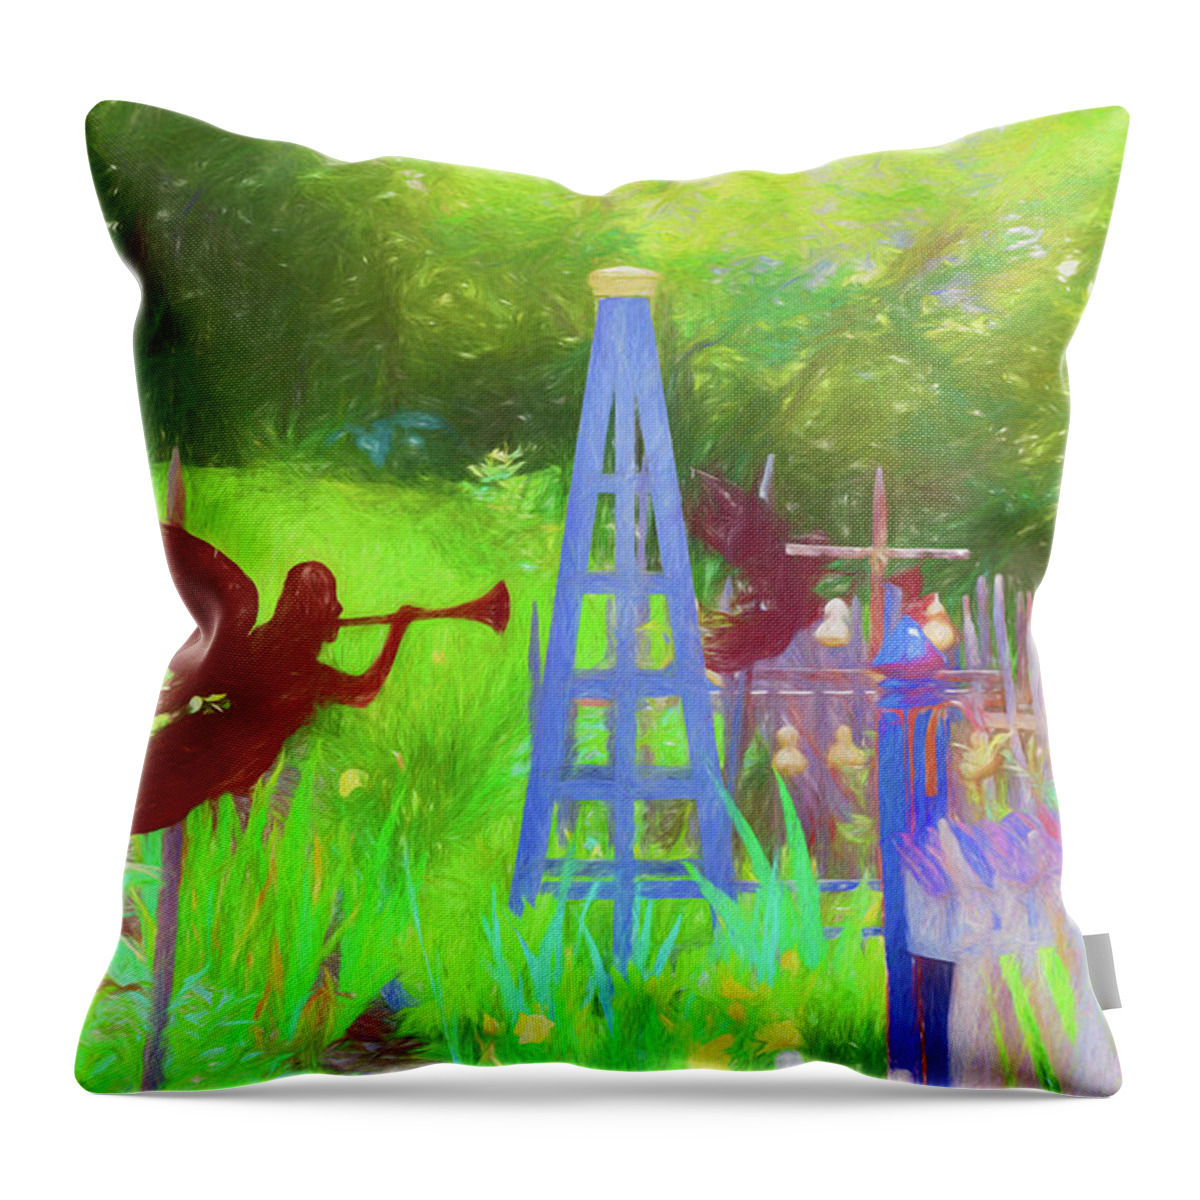 Antiques Throw Pillow featuring the digital art Old Ipswich Shoppe, Ipswich, MA by Barry Wills